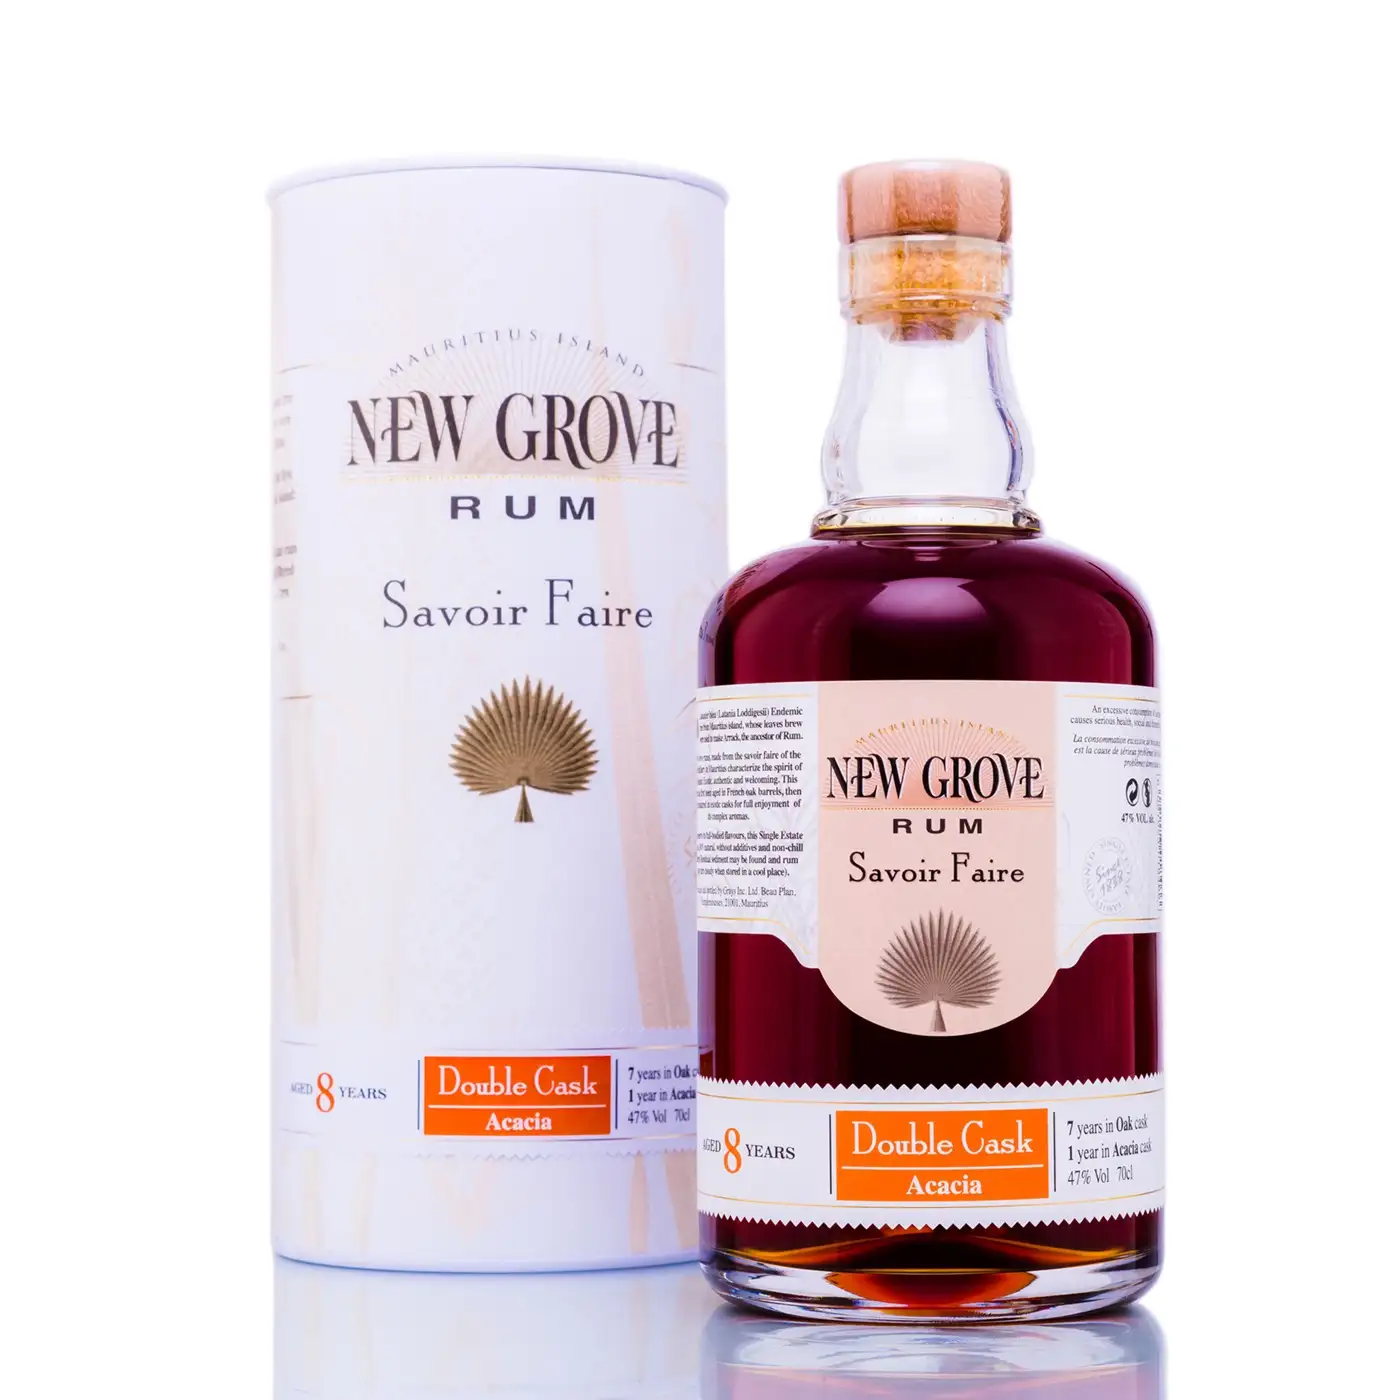 Image of the front of the bottle of the rum New Grove Savoir Faire Double Cask Acacia